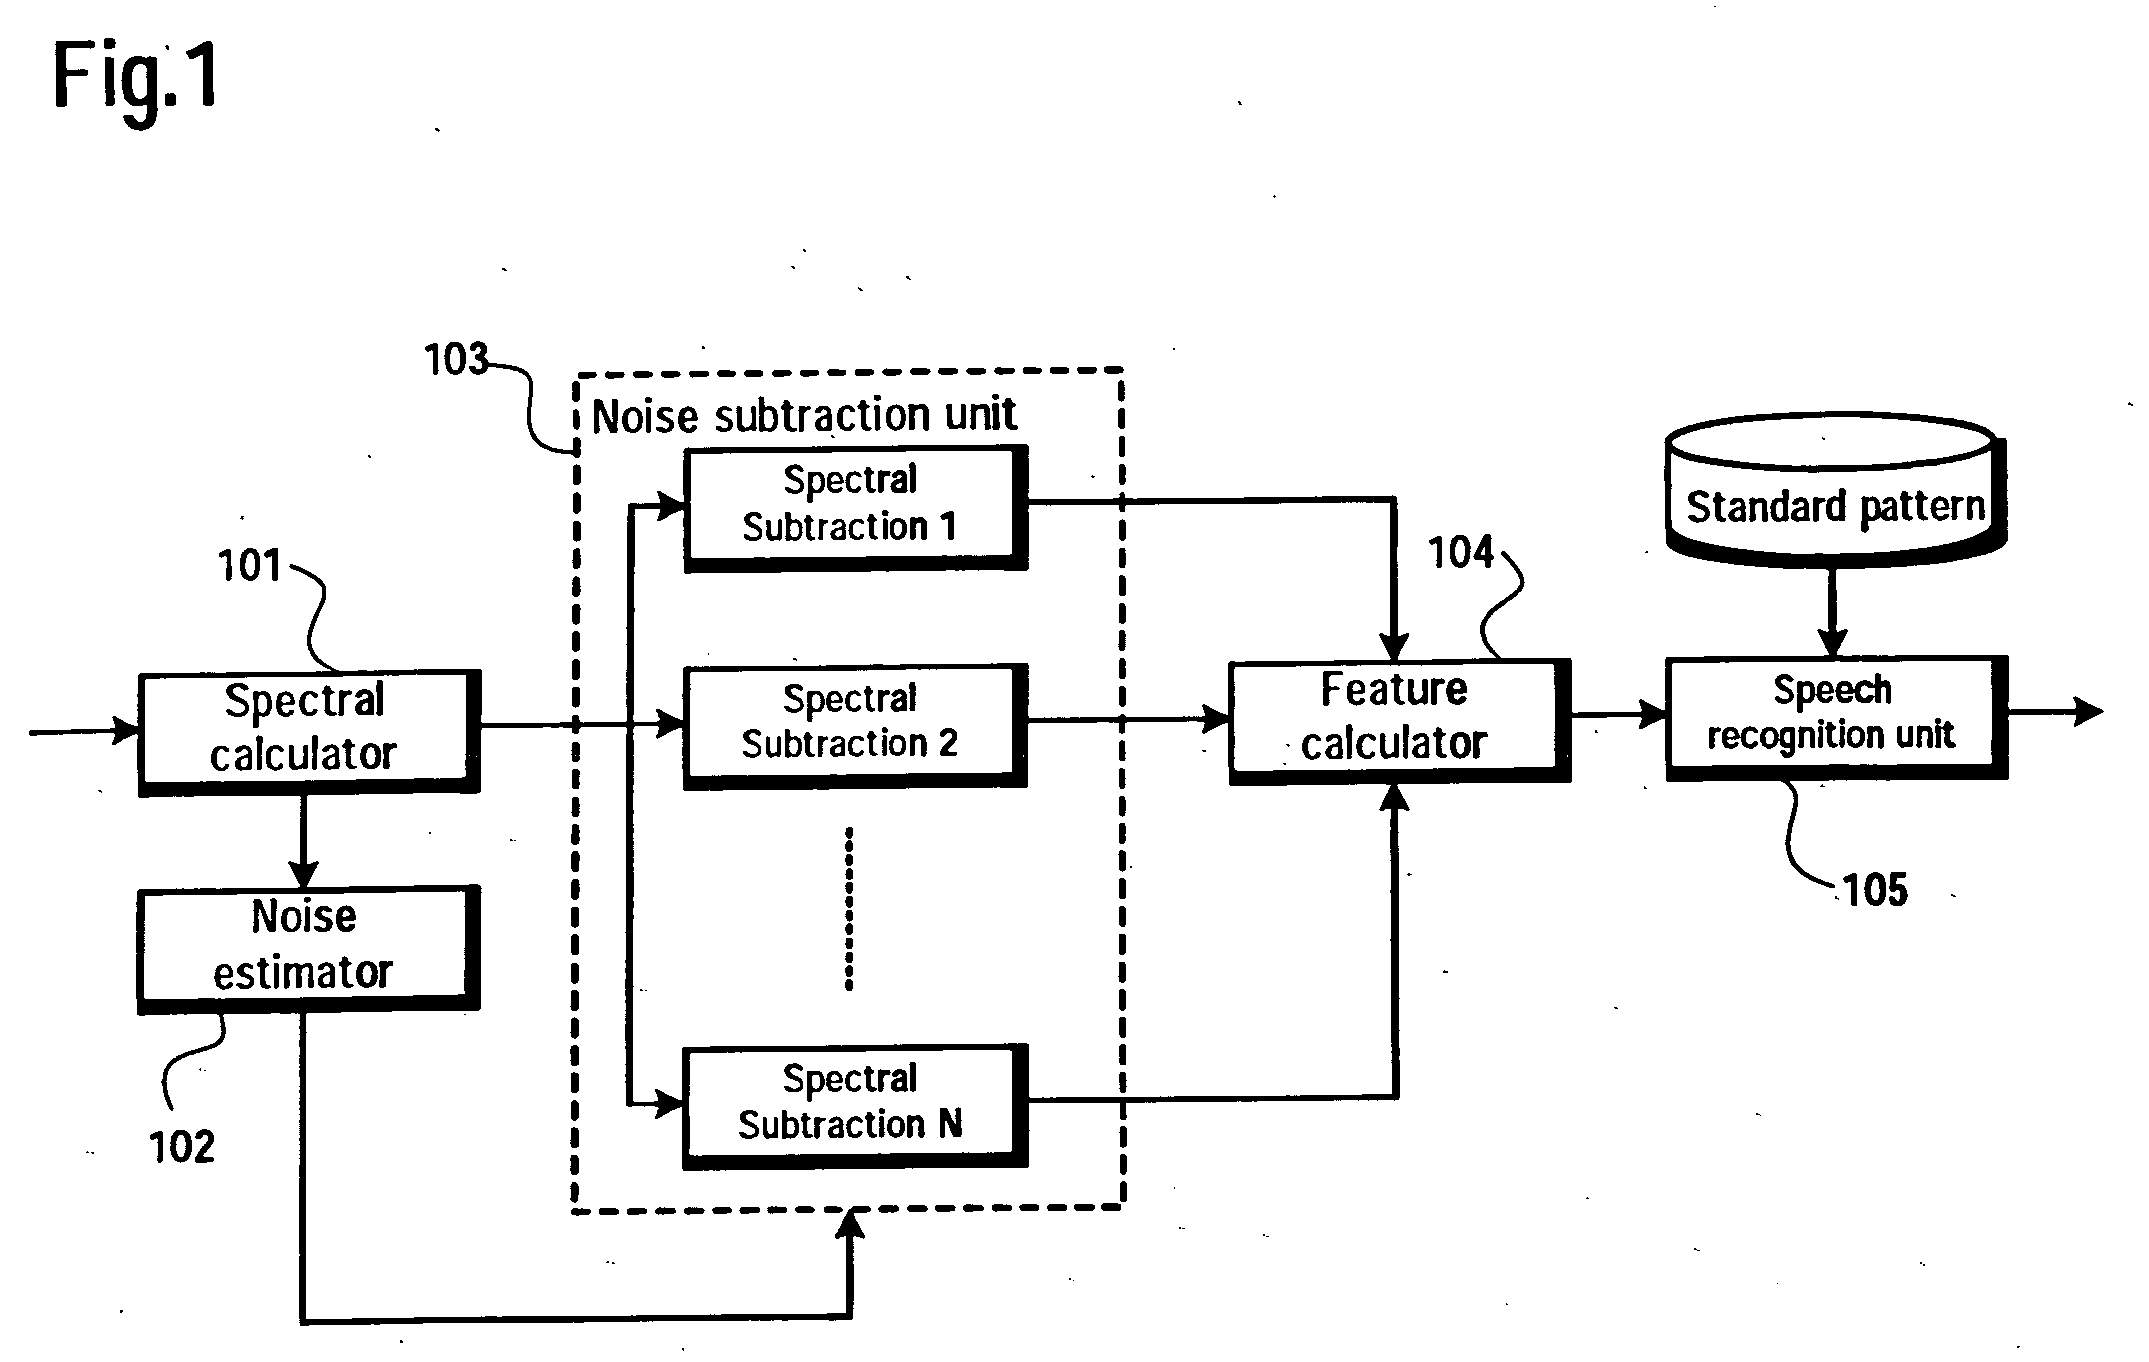 Speech recognition apparatus, method and computer program product